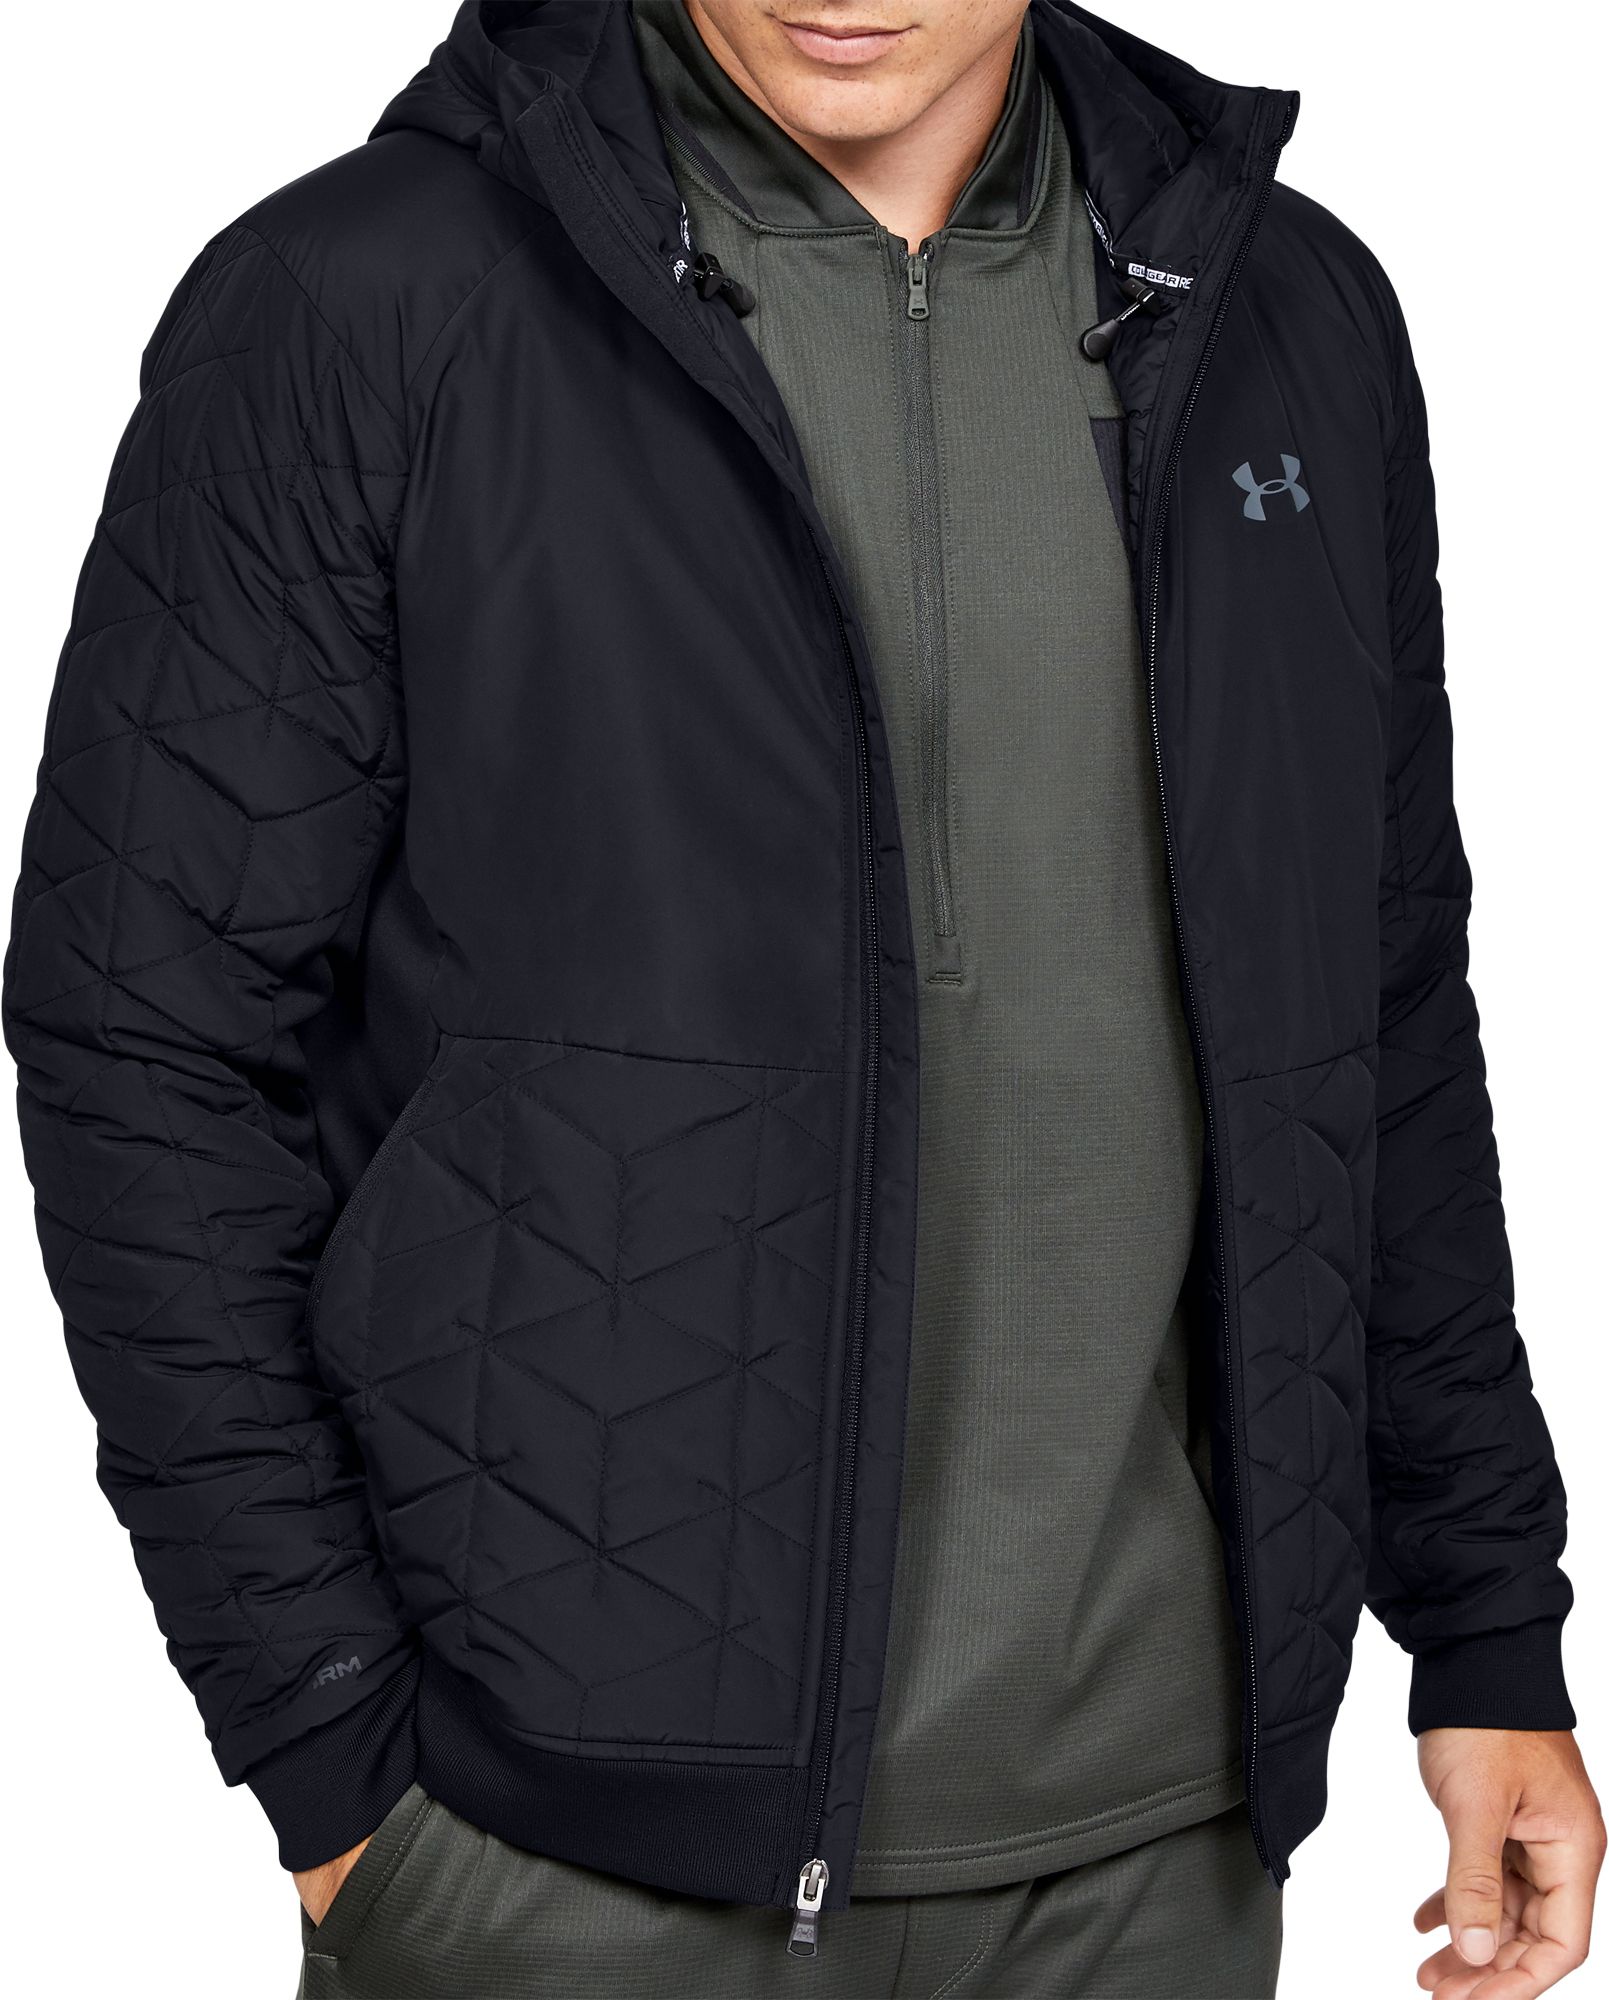 under armour sports jacket